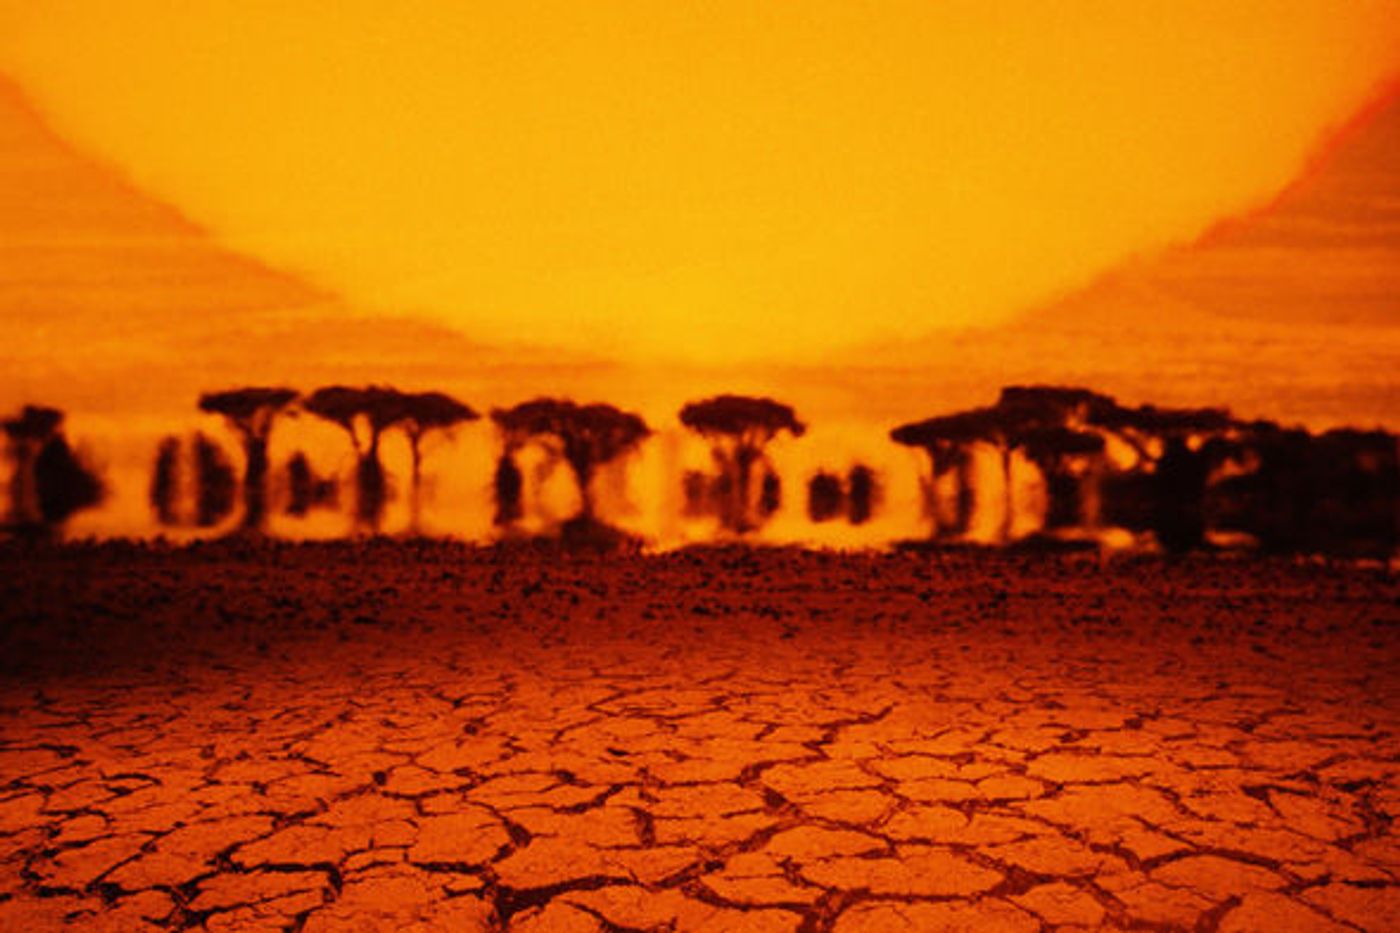 Heat may seem more pervasive in the years to come. Photo: Daily Express